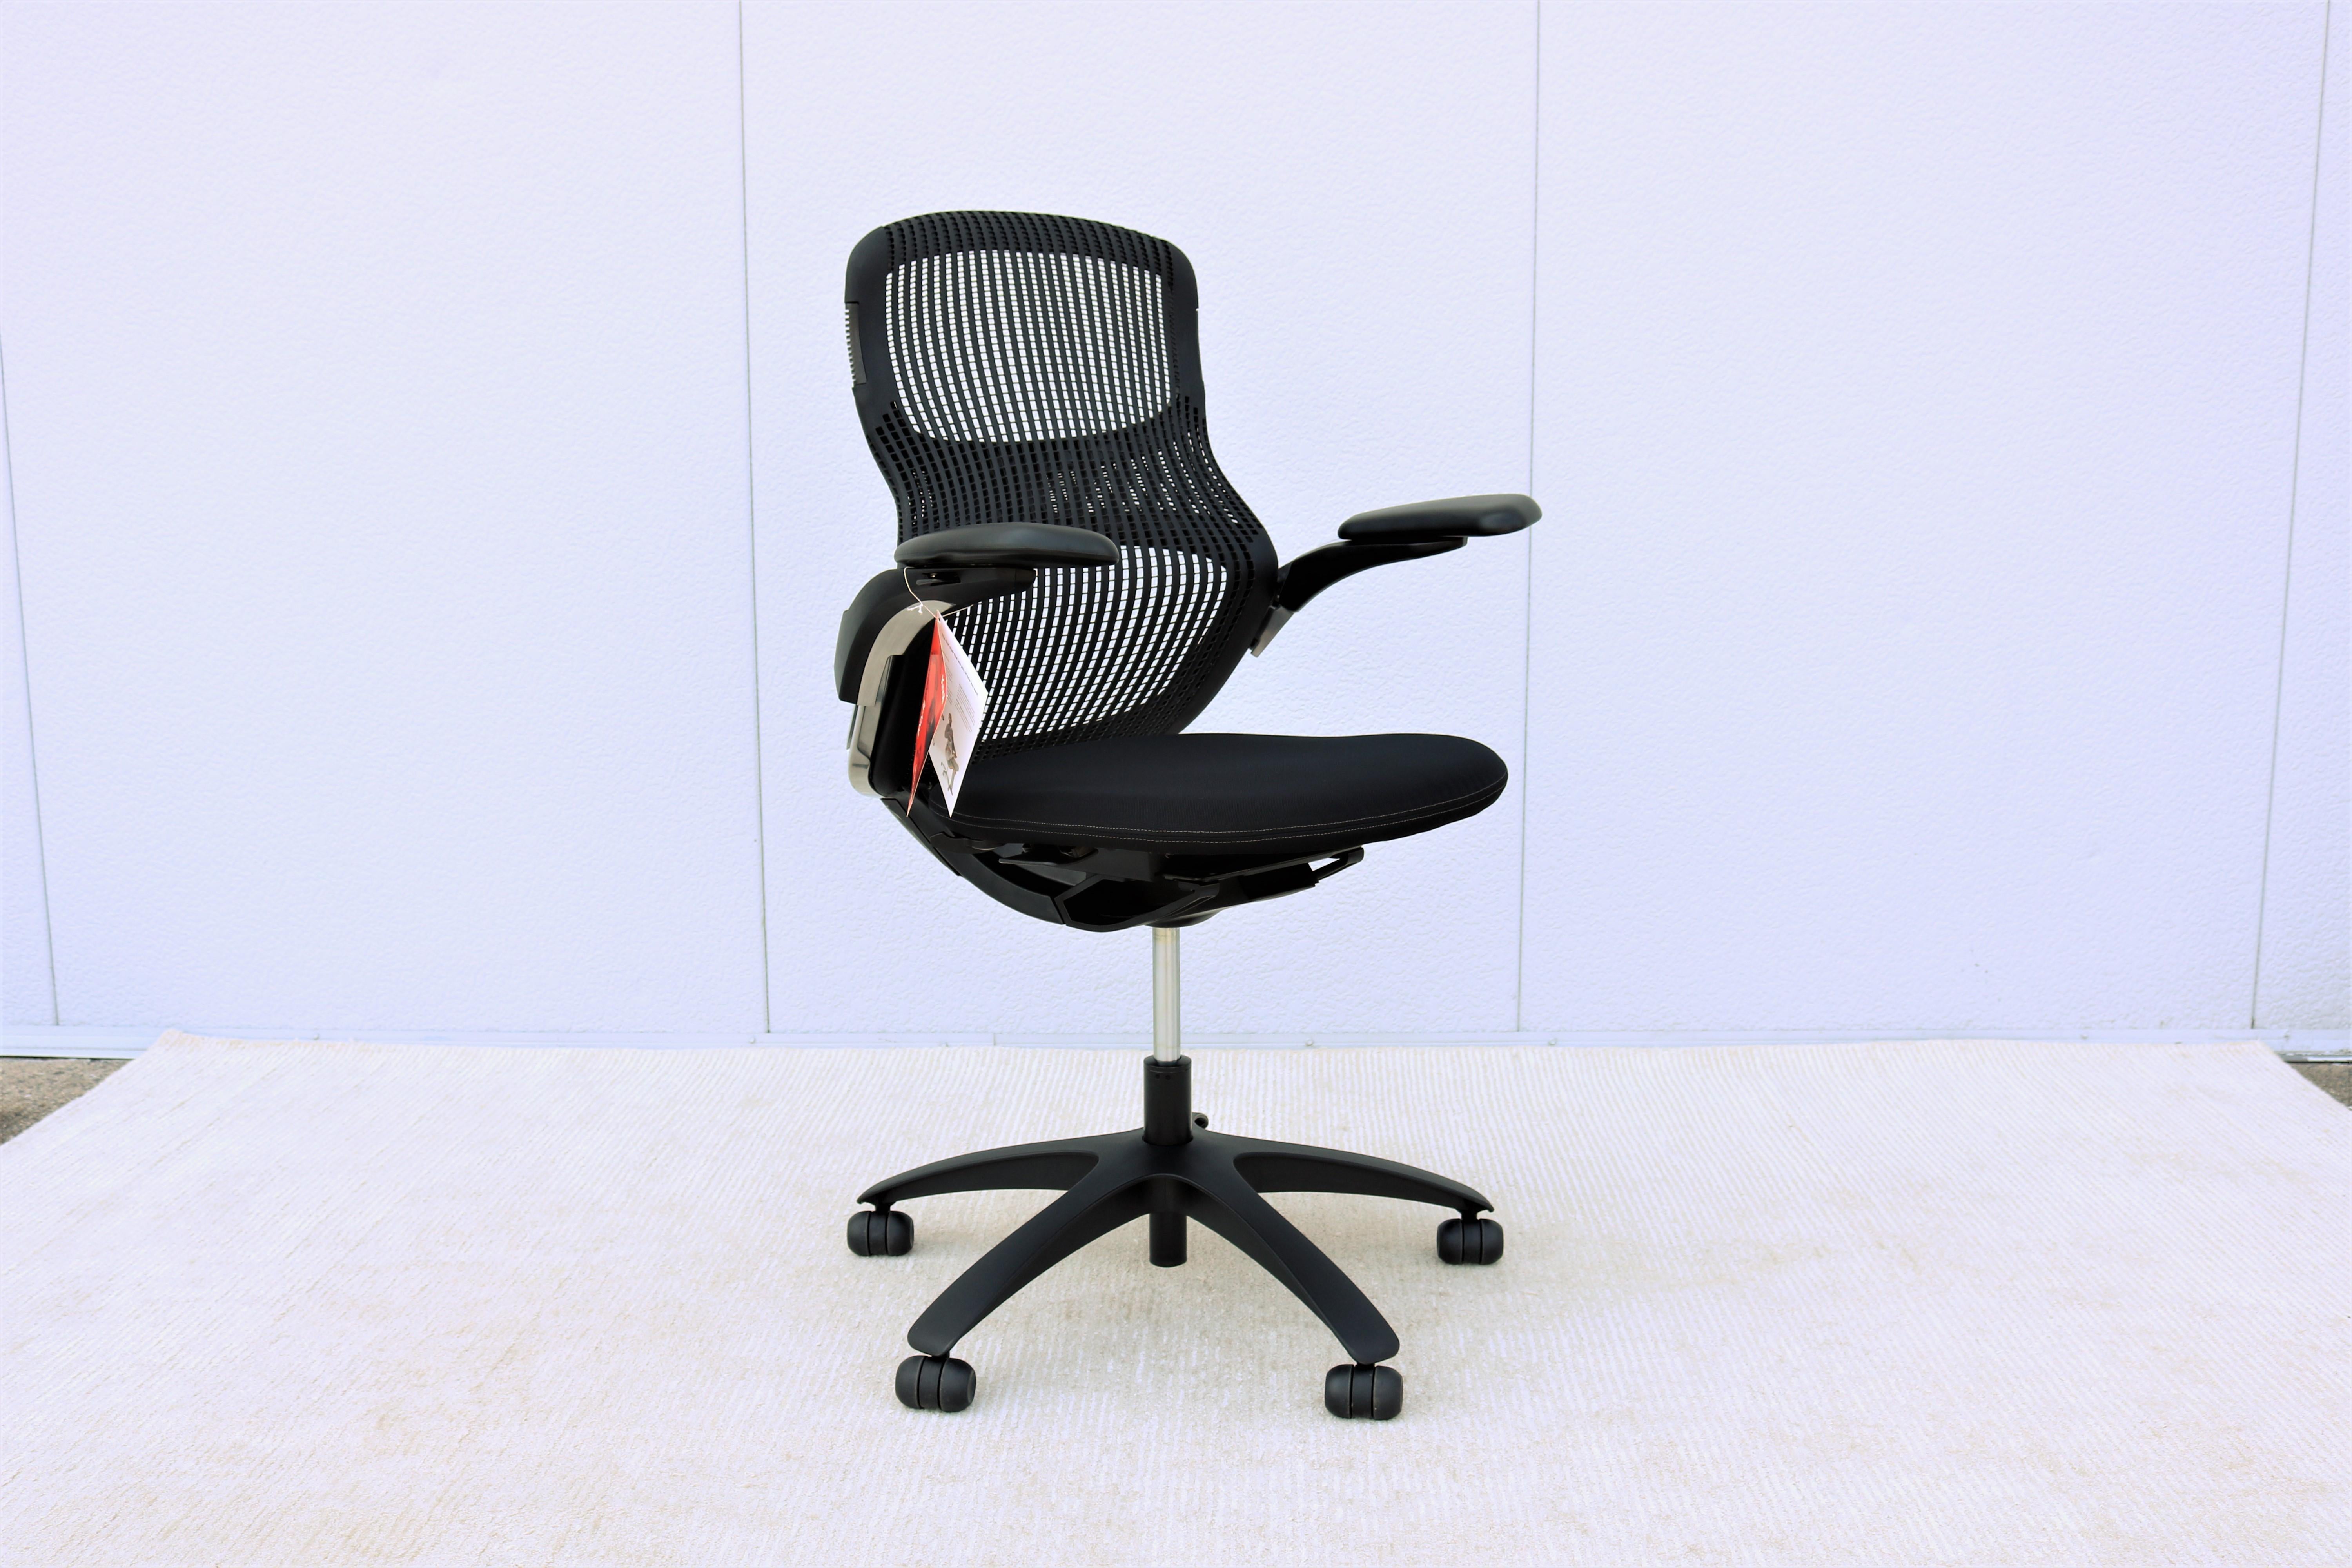 Knoll Generation black ergonomic office desk chair fully adjustable, brand new.
Generation by Knoll is an award-winning office chair that offers a new standard of comfort and unrestrained movement to whoever sits in it, allowing you to sit how you